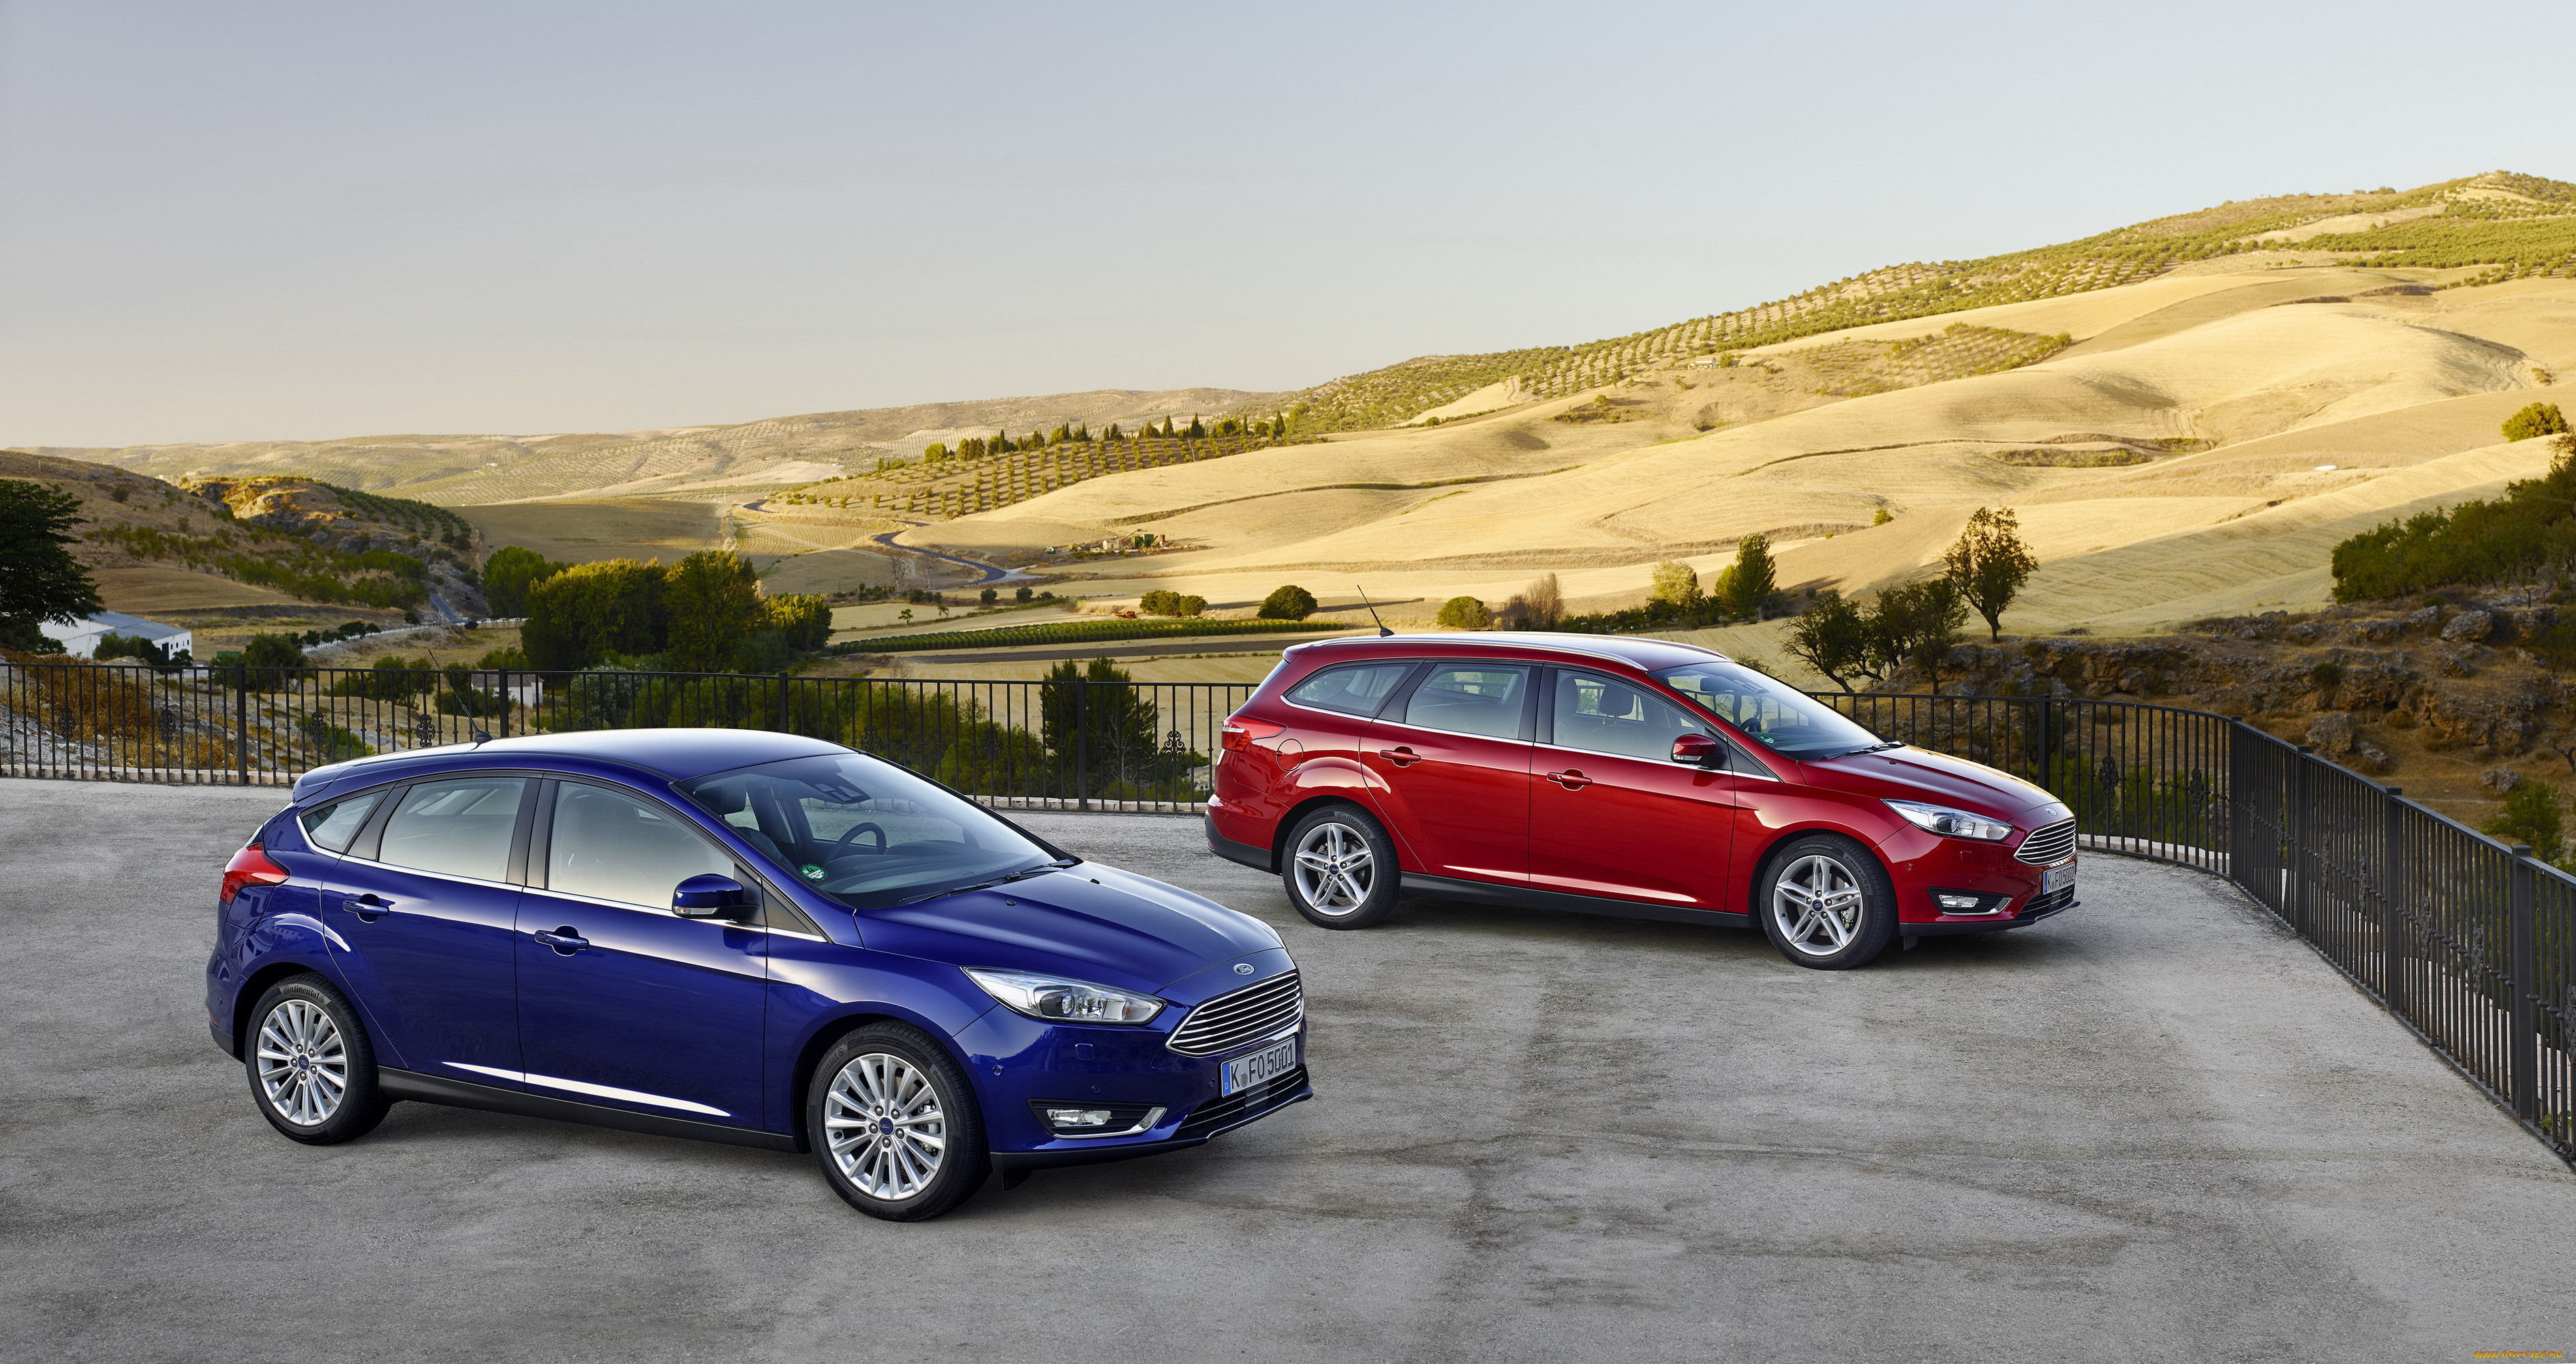 2014 ford focus sw, , ford, , , , focus